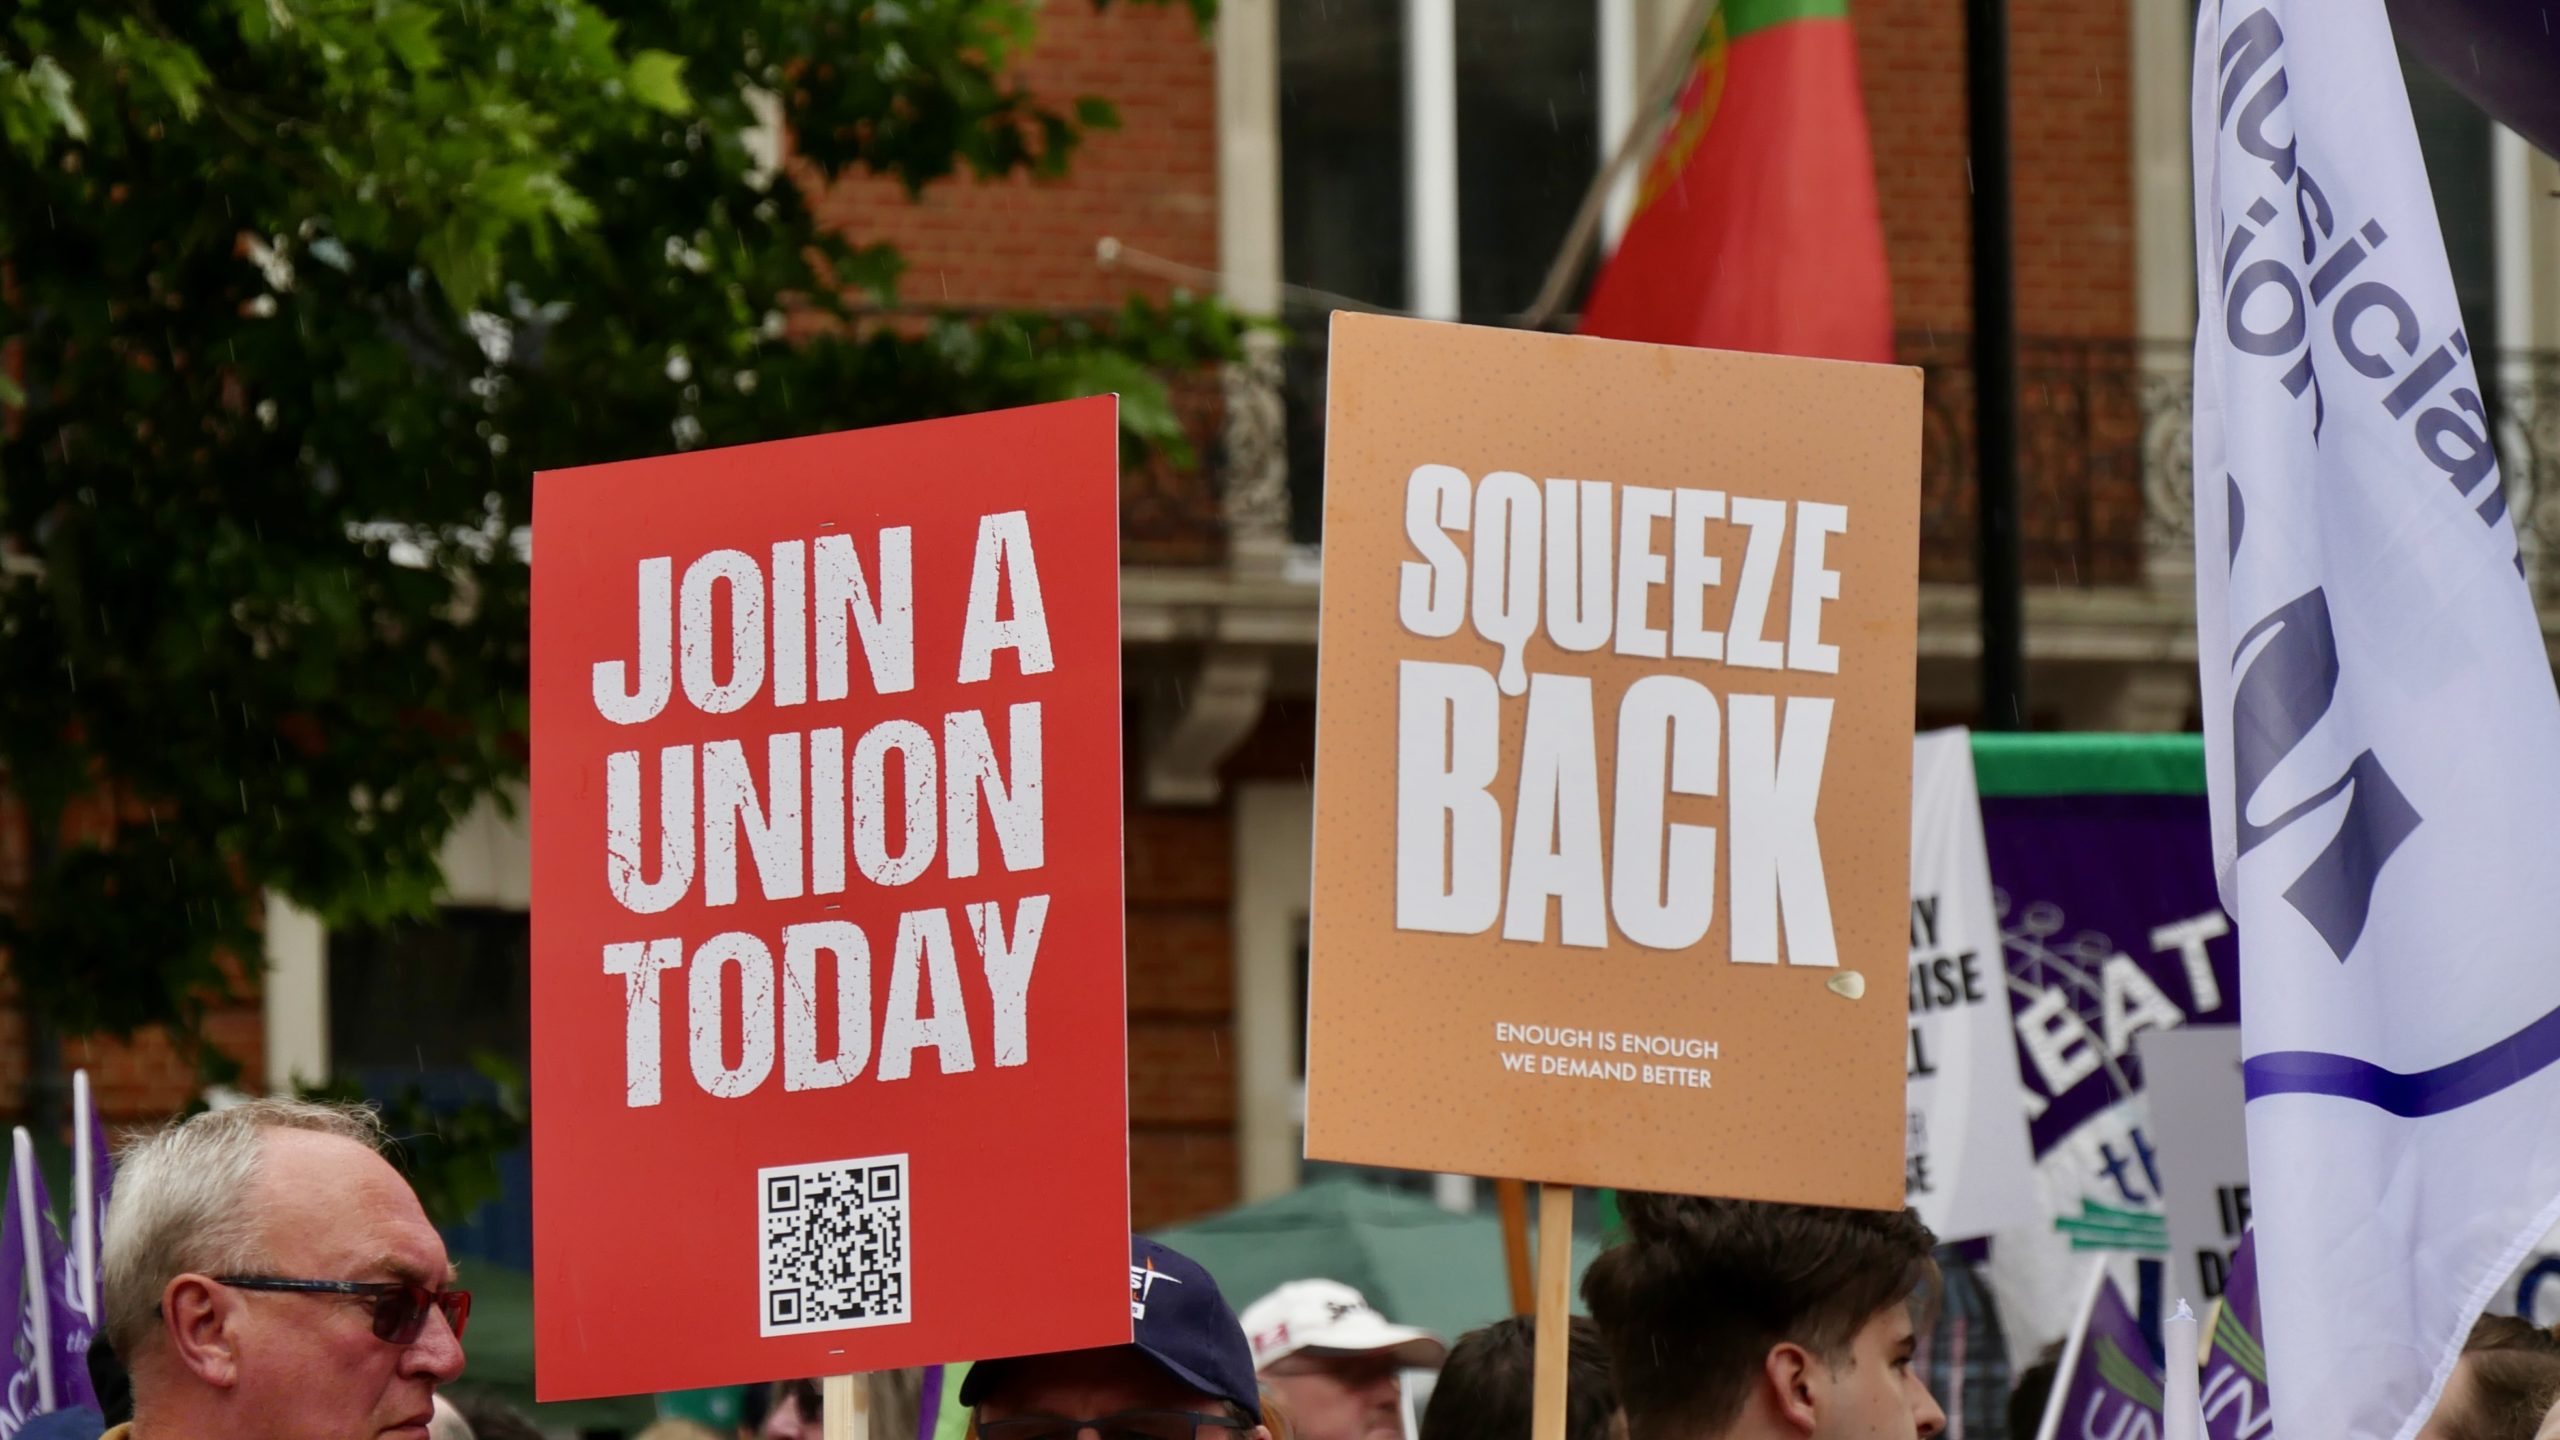 Signs that read "Join a union today" and "Squeeze back" are held up by protestors